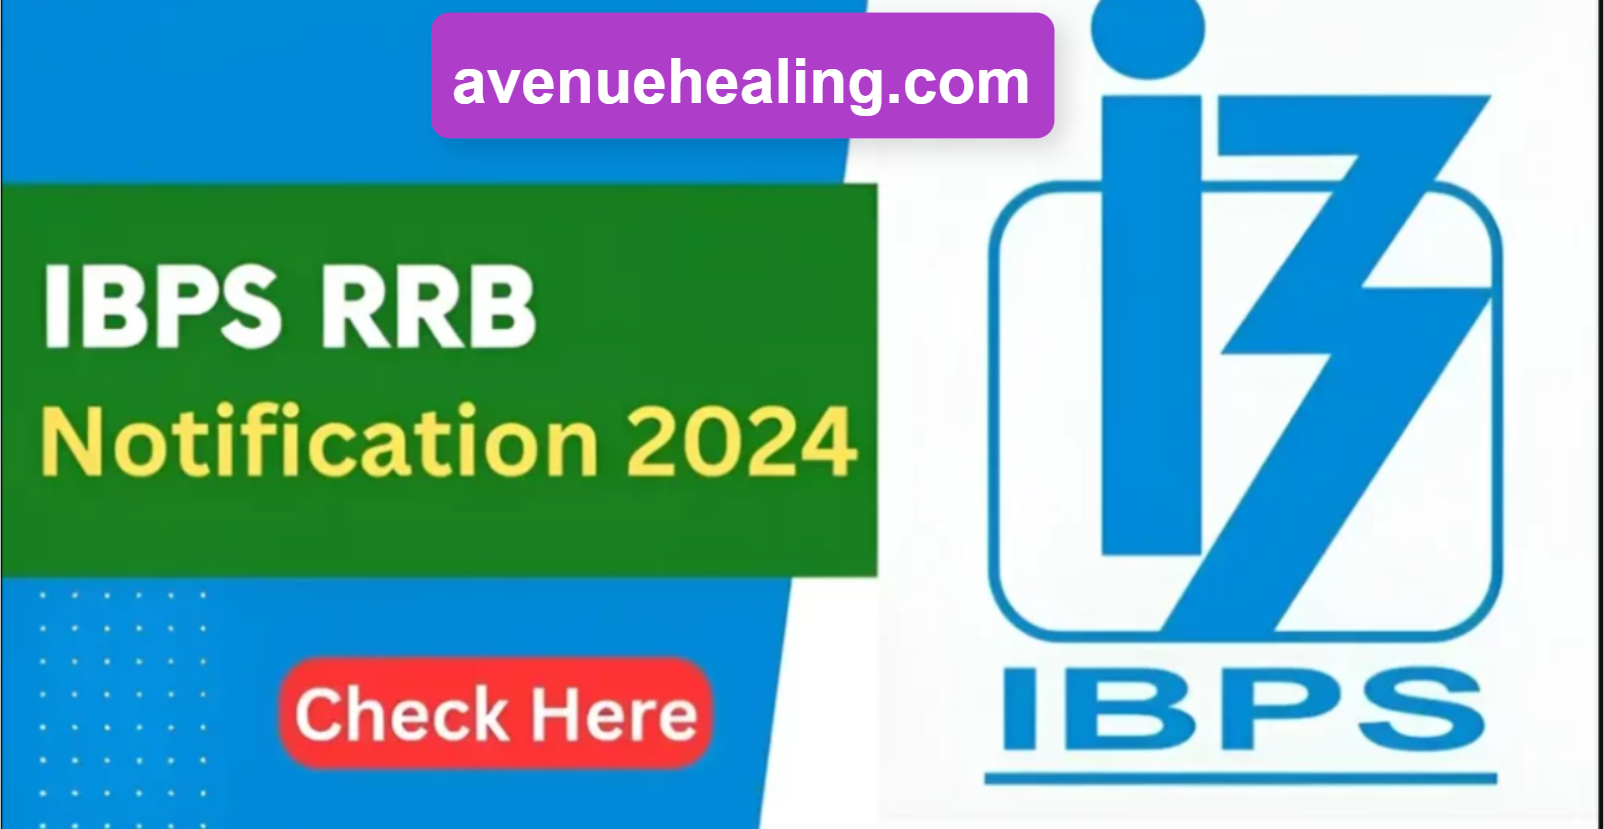 IBPS RRB Notification 2024 PDF Released: Apply Online for 9000+ Office Assistant/Clerk & Officer/PO Recruitment